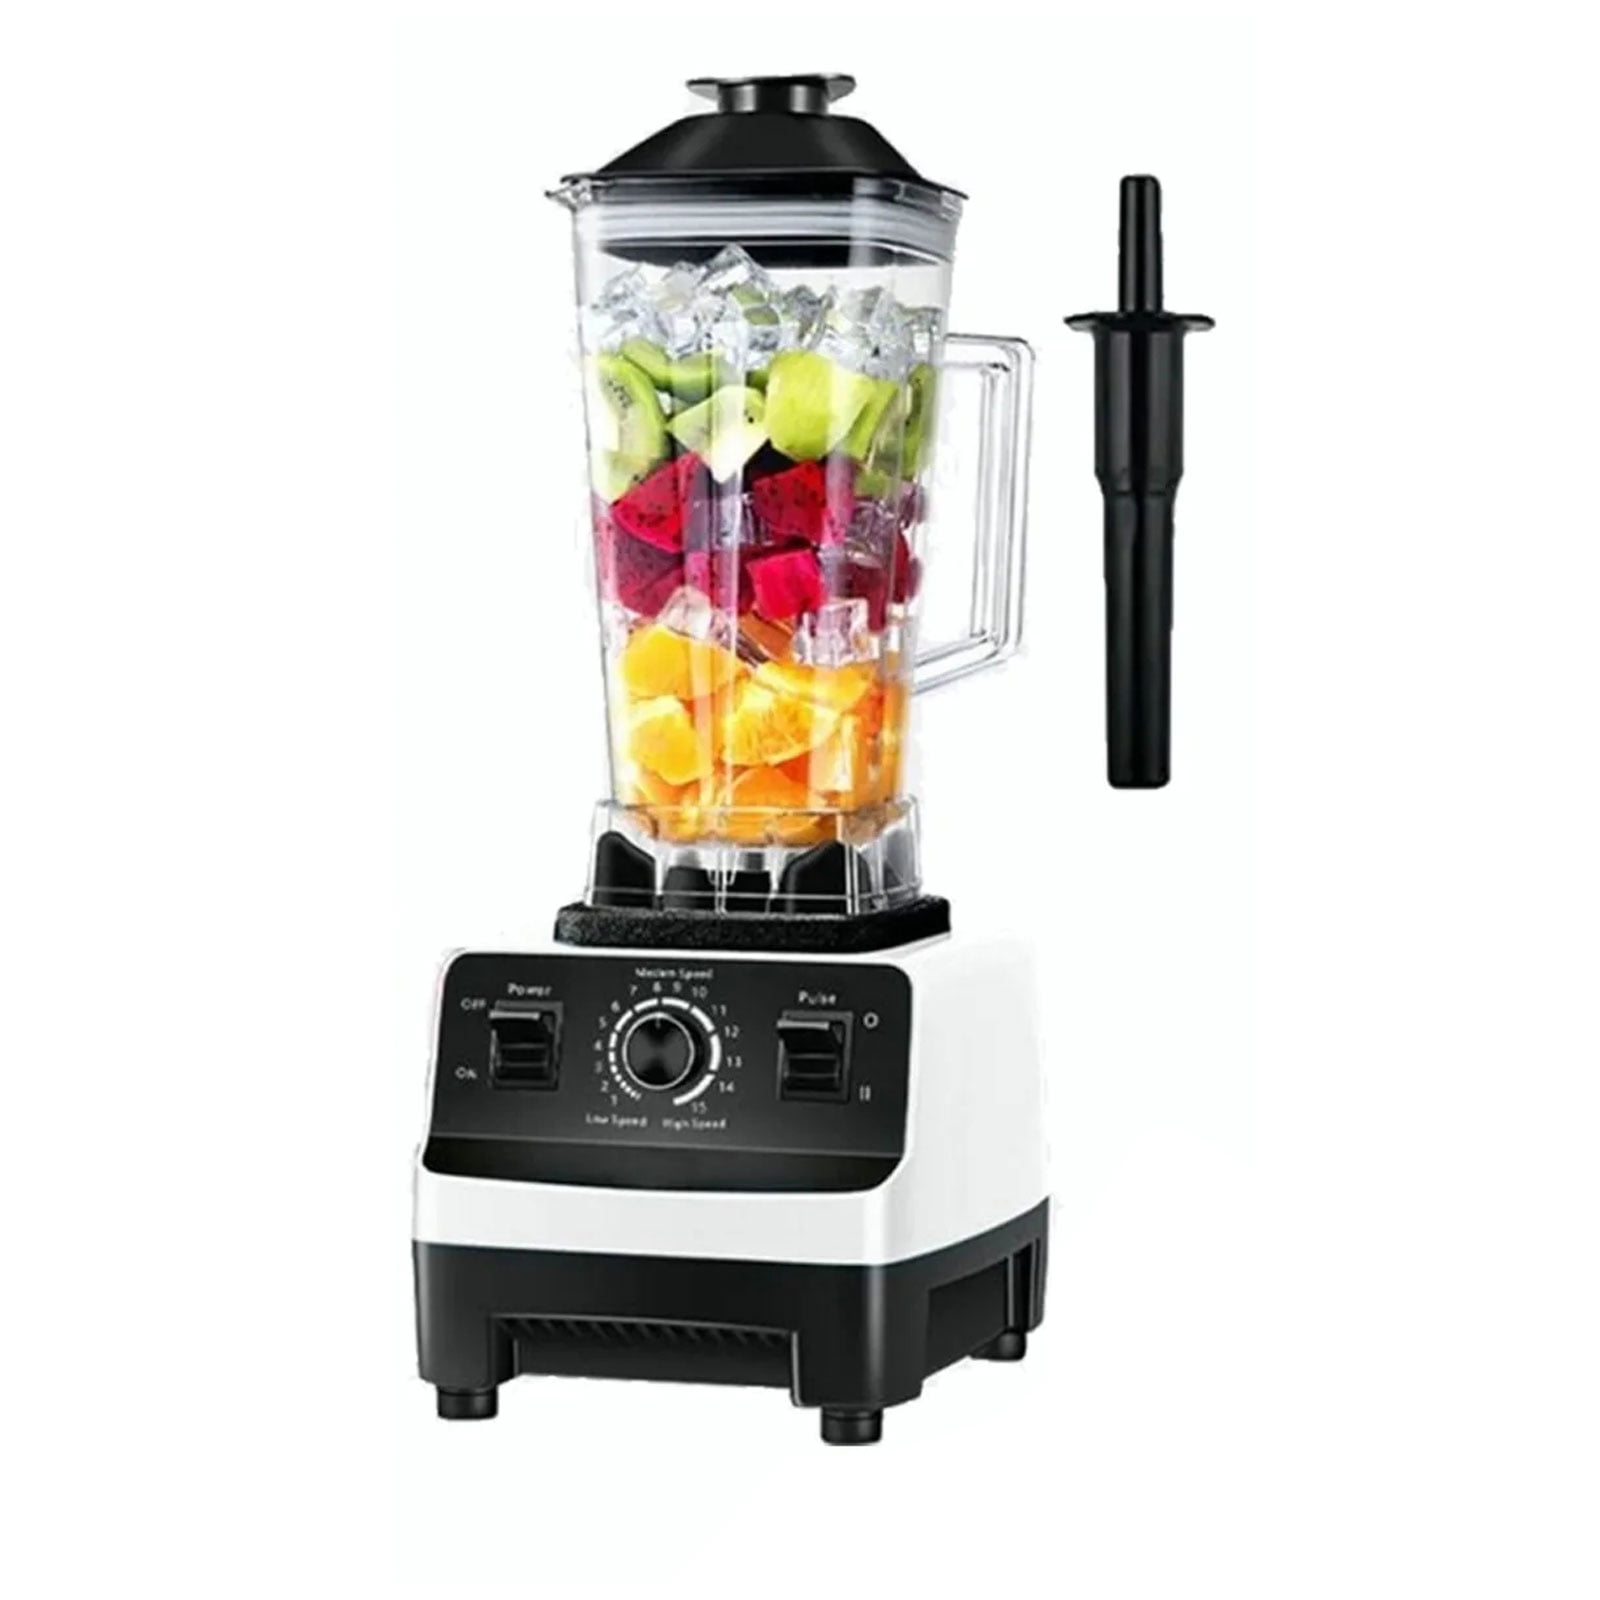 Houselin 5000W Personal Countertop Blender Mixer Juicer Fruit Food  Processor For Smoothies, Shakes & More